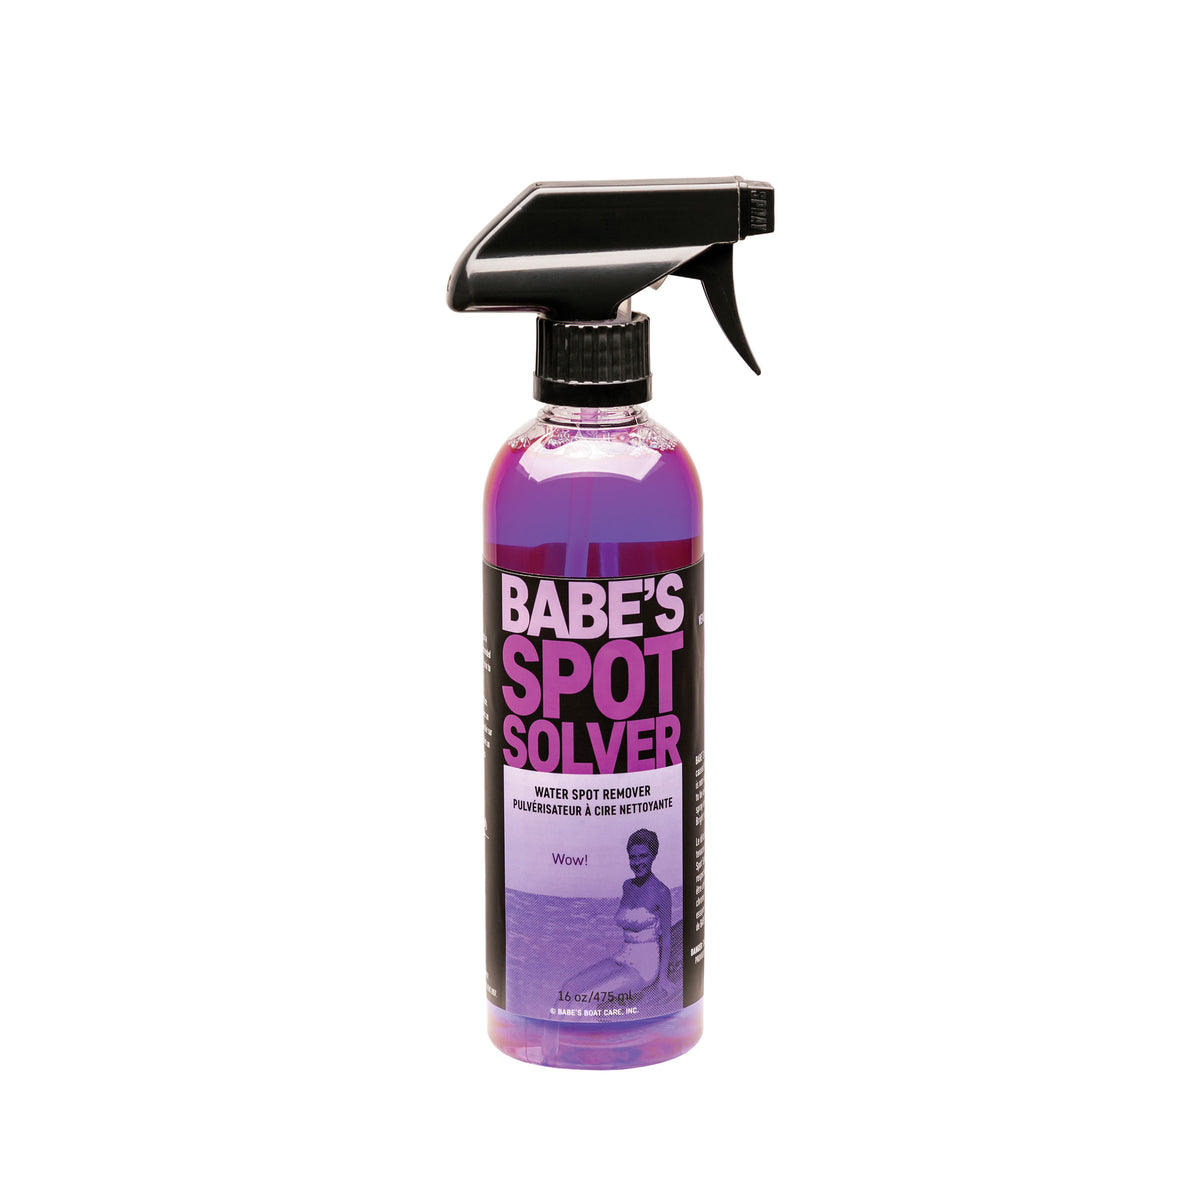 BABE'S Boat Care Products BB8116 Spot Solver - 16 oz.